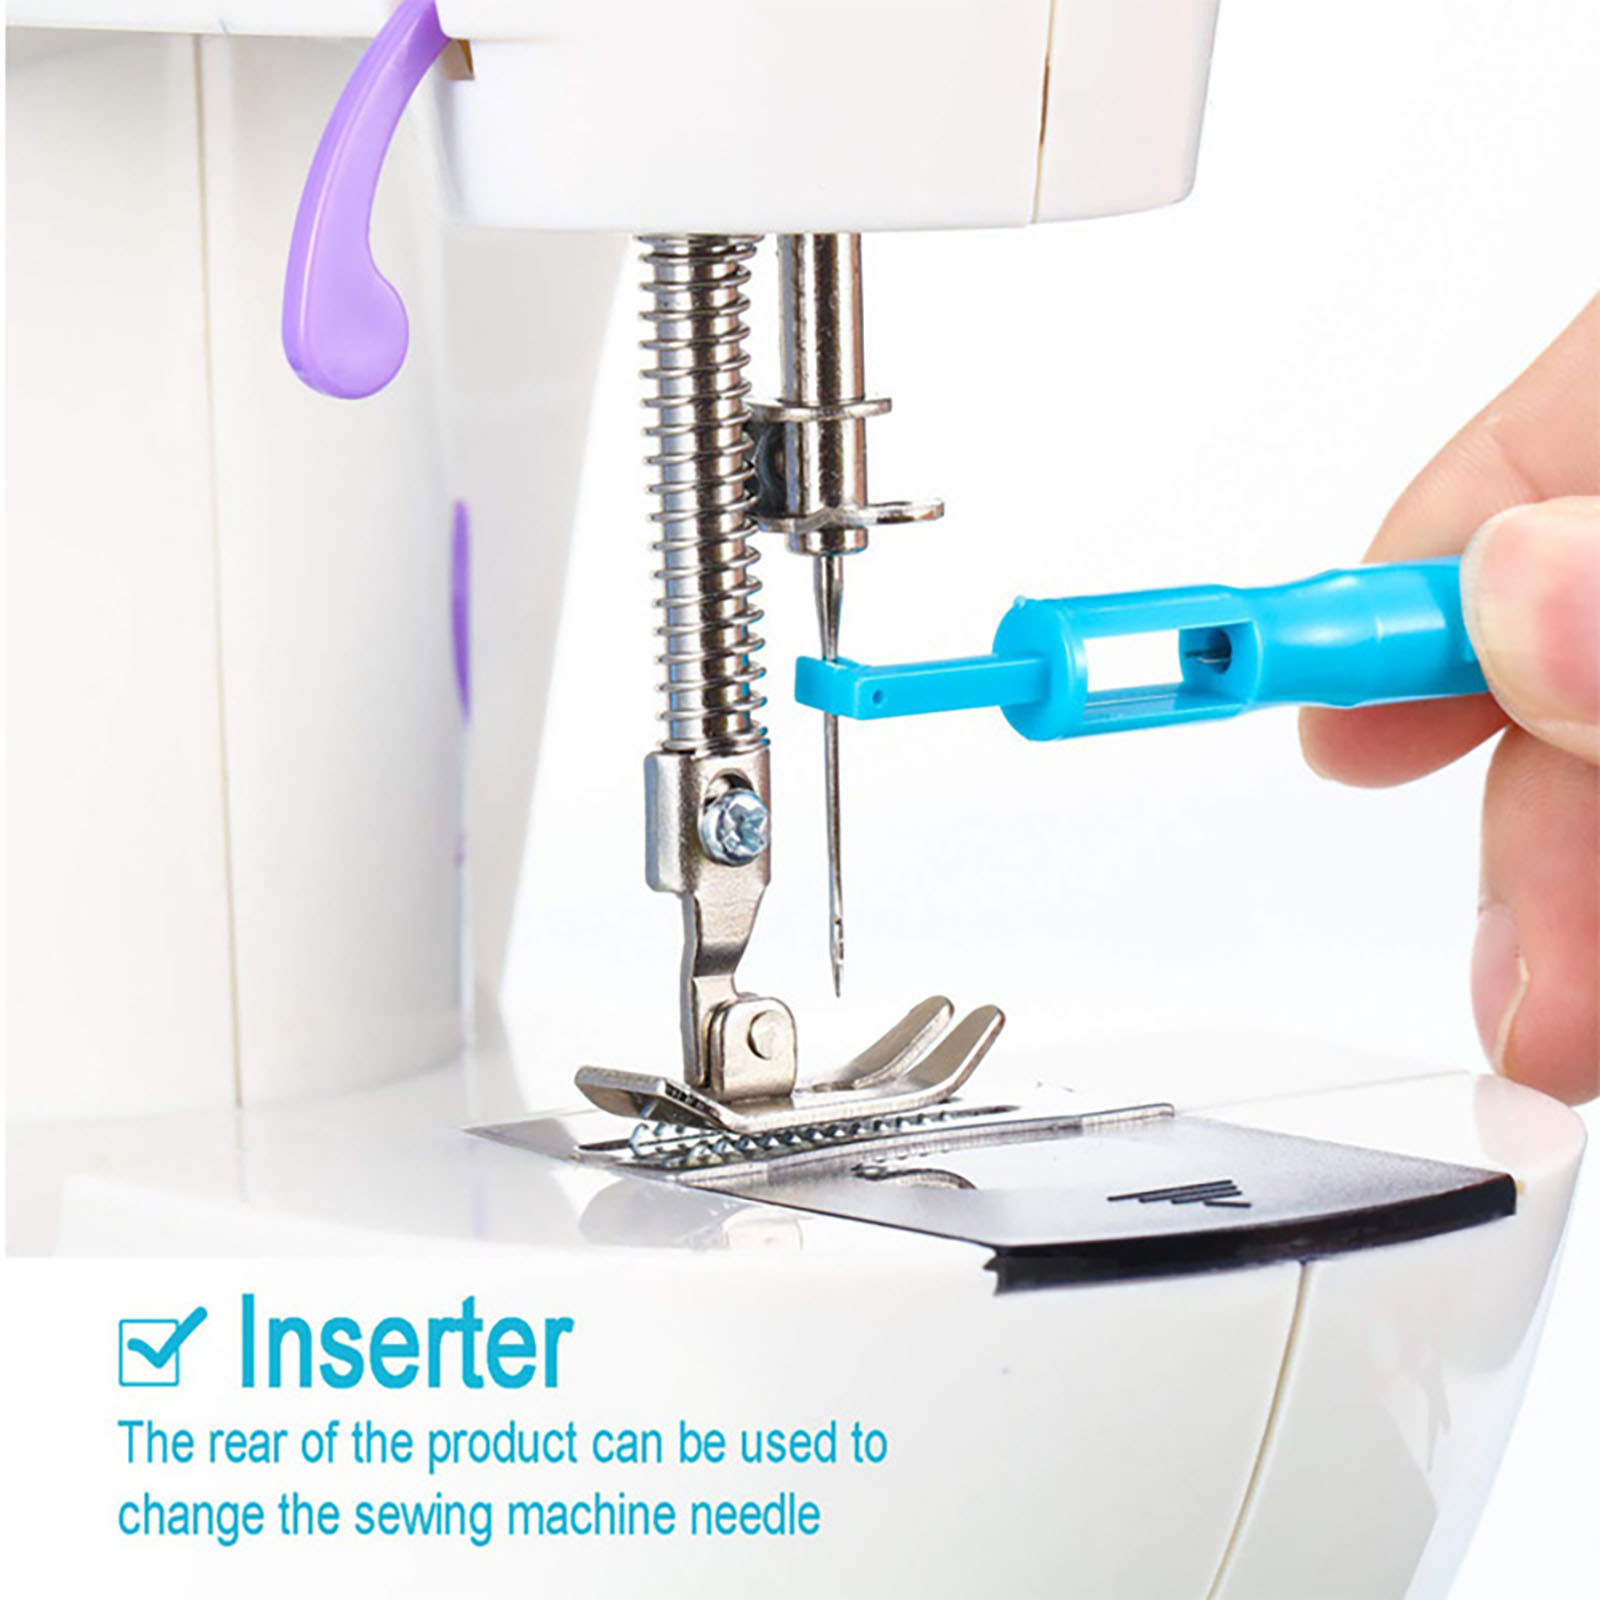 iOPQO Accessories Sewing Needle Inserter Automatic Needle Threader Needle  Threading Tool For Sewing Machine Arts And Crafts 